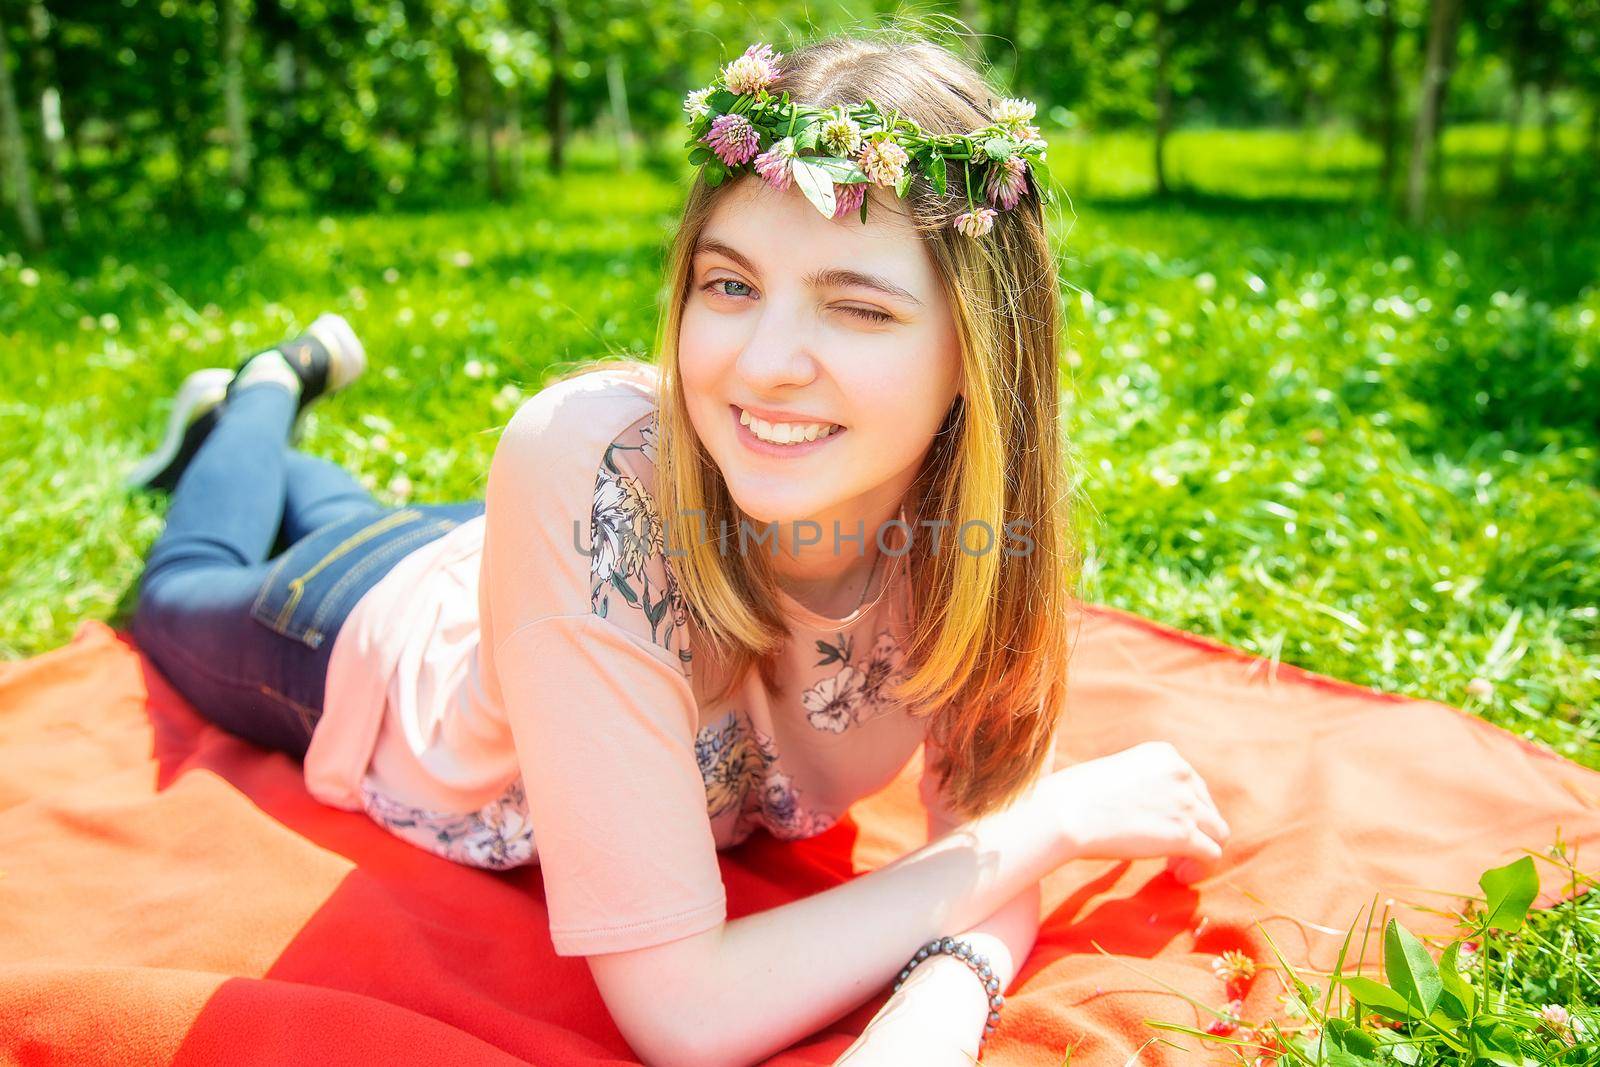 Young girl 20 years old Caucasian appearance smiling looking at the camera while lying on the lawn in the park on a summer day. The girl is dressed in a T-shirt and jeans and a wreath of wildflowers.